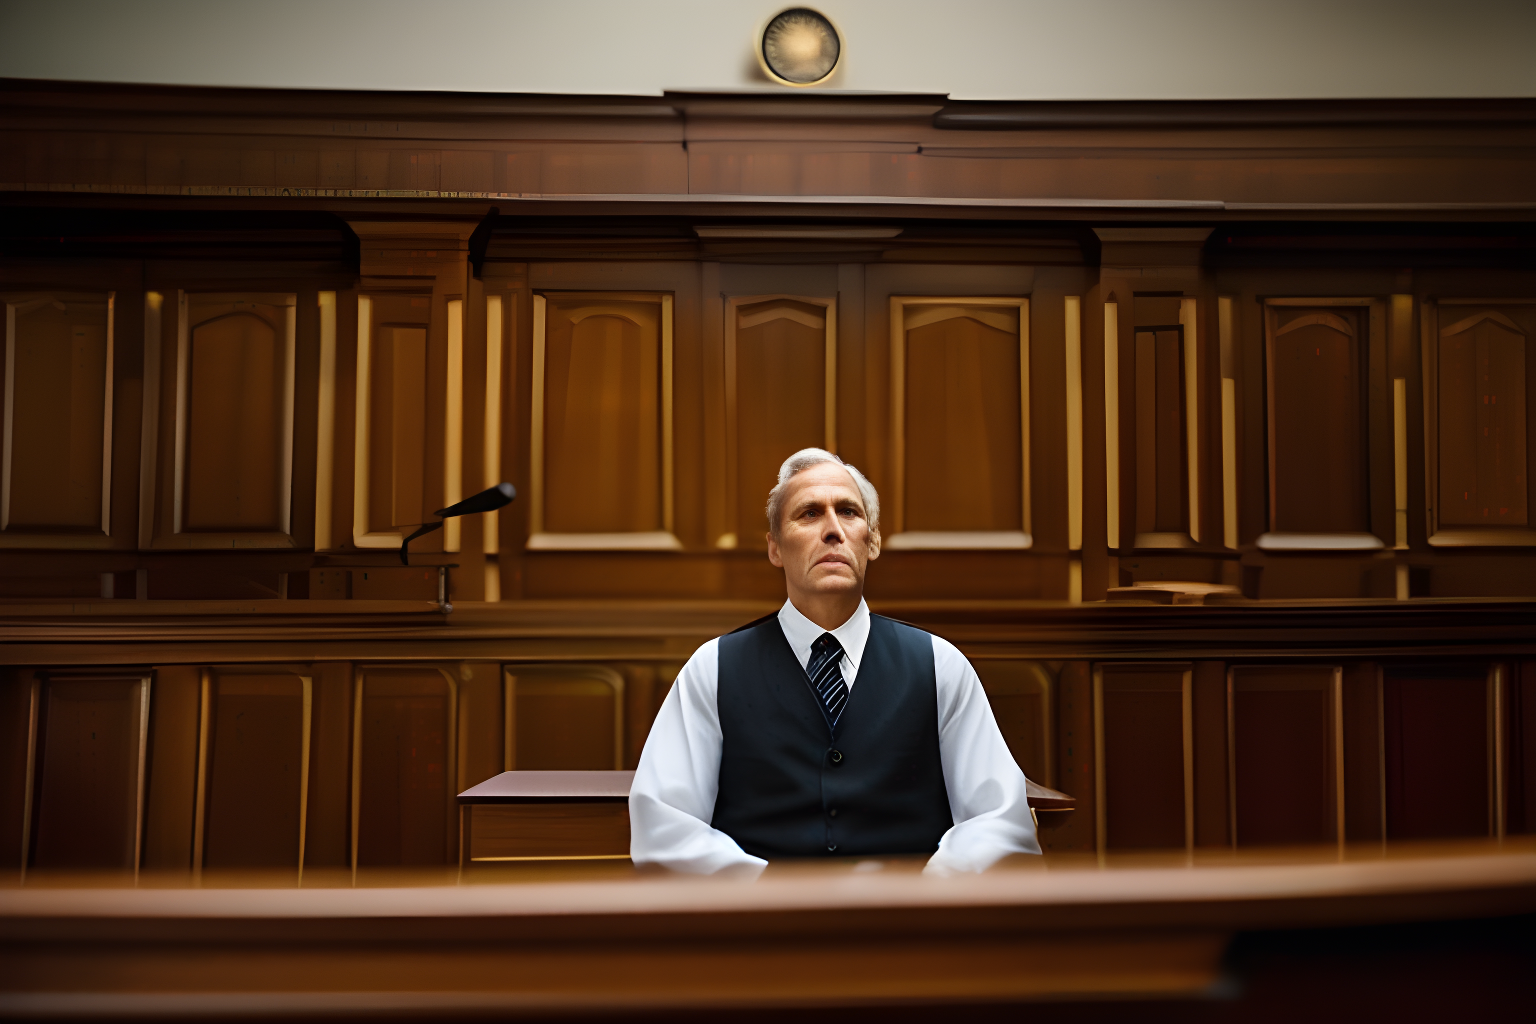 Breathtaking photograph of a man in the witness stand of a court room, his right hand on his chest.